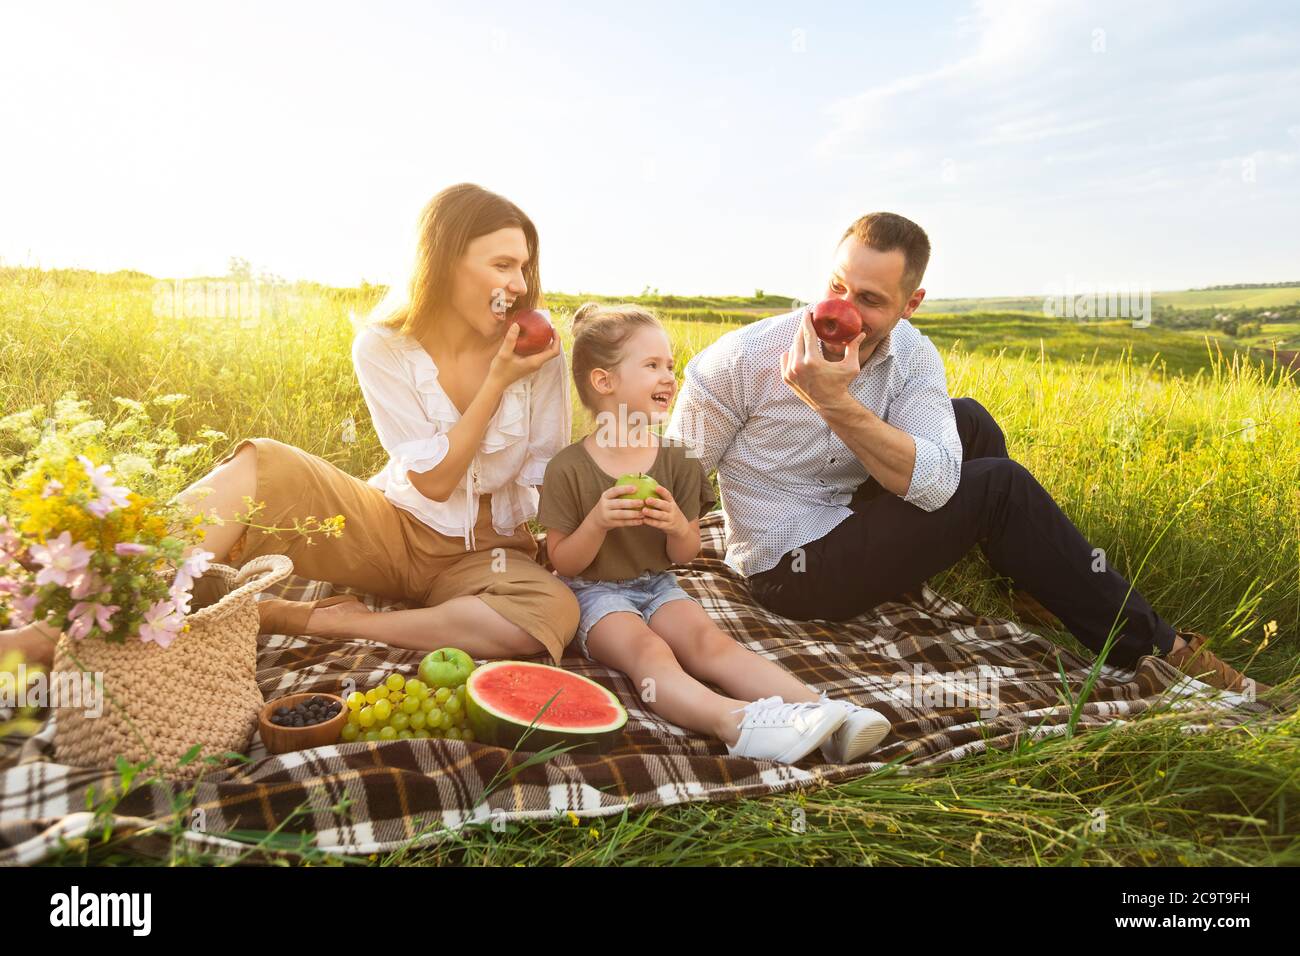 Young family playing with fruits on a picnic outdoor Stock Photo